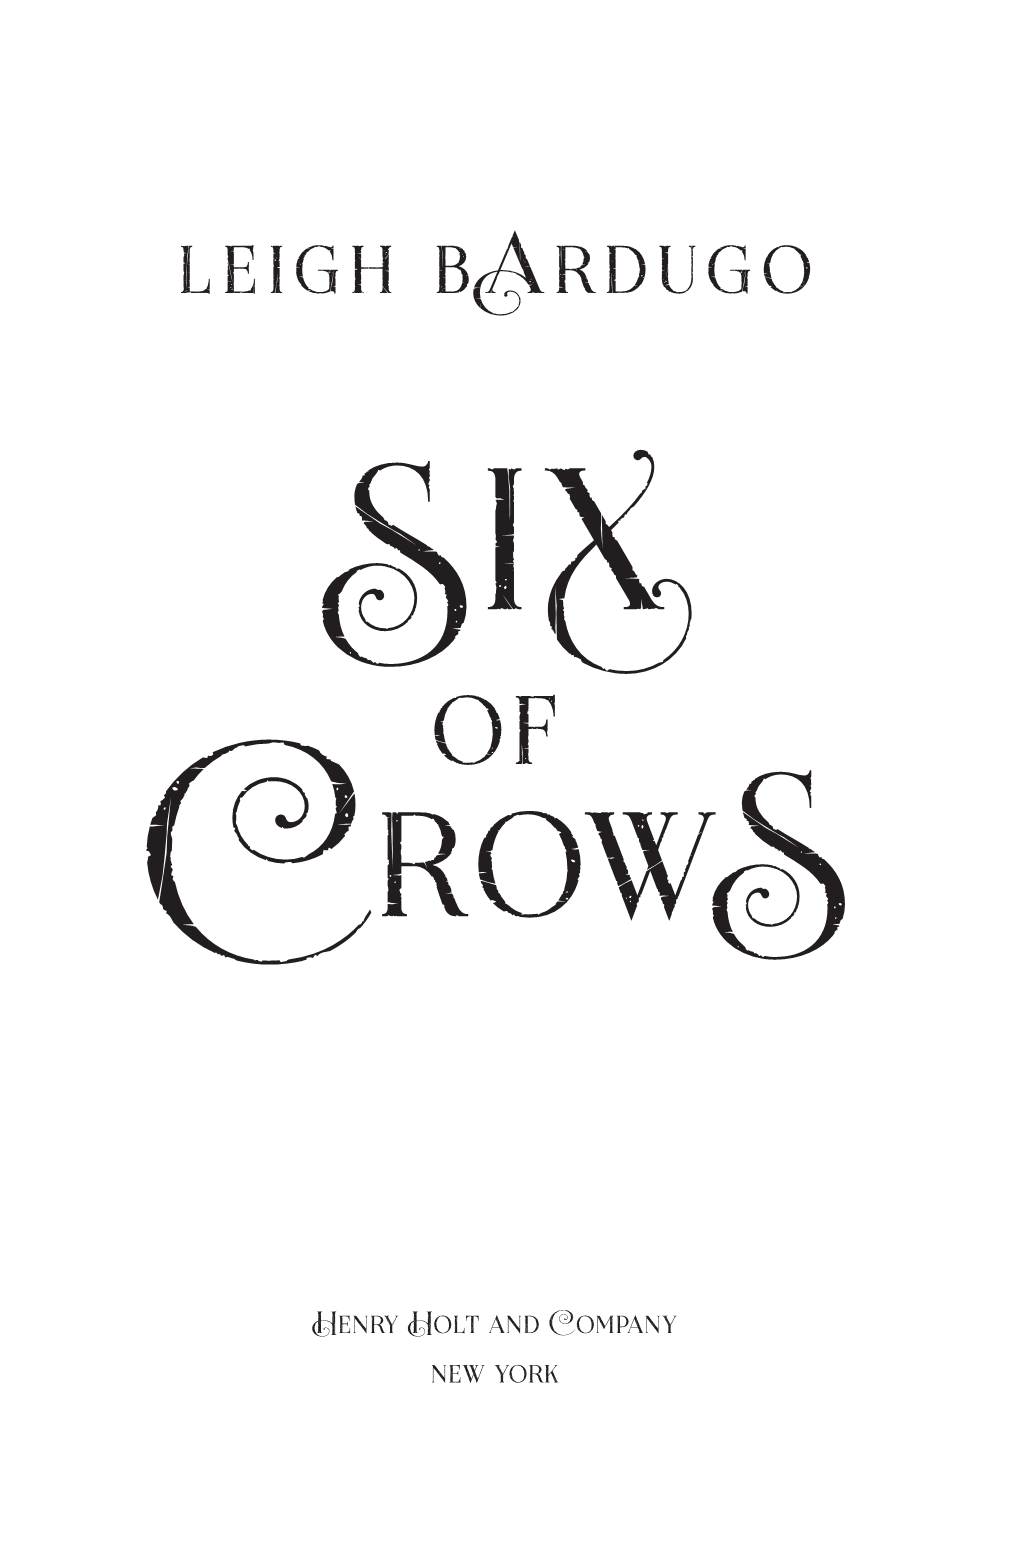 Leigh Bardugo SIX of Crows